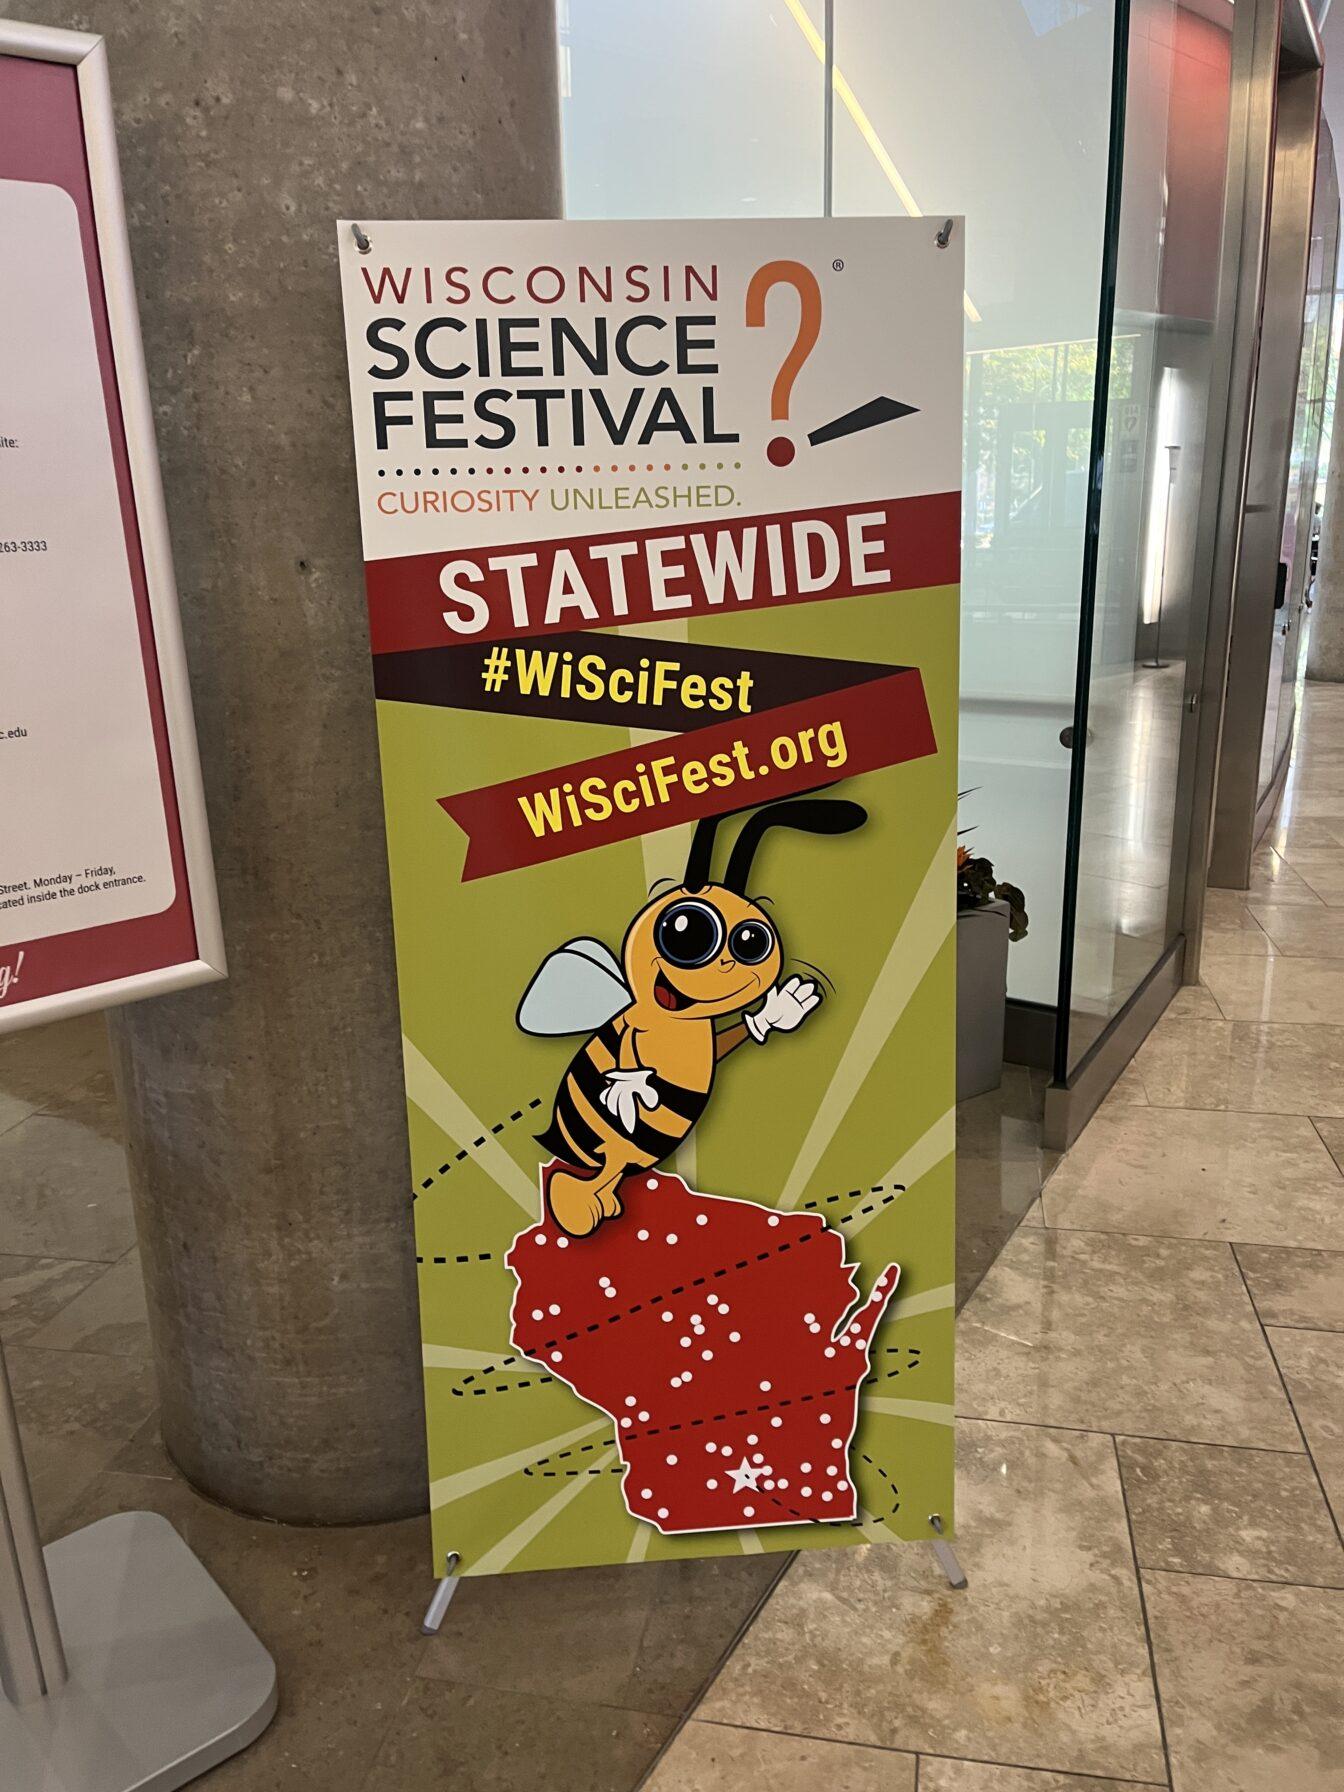 Looking ahead at this years Wisconsin Science Festival